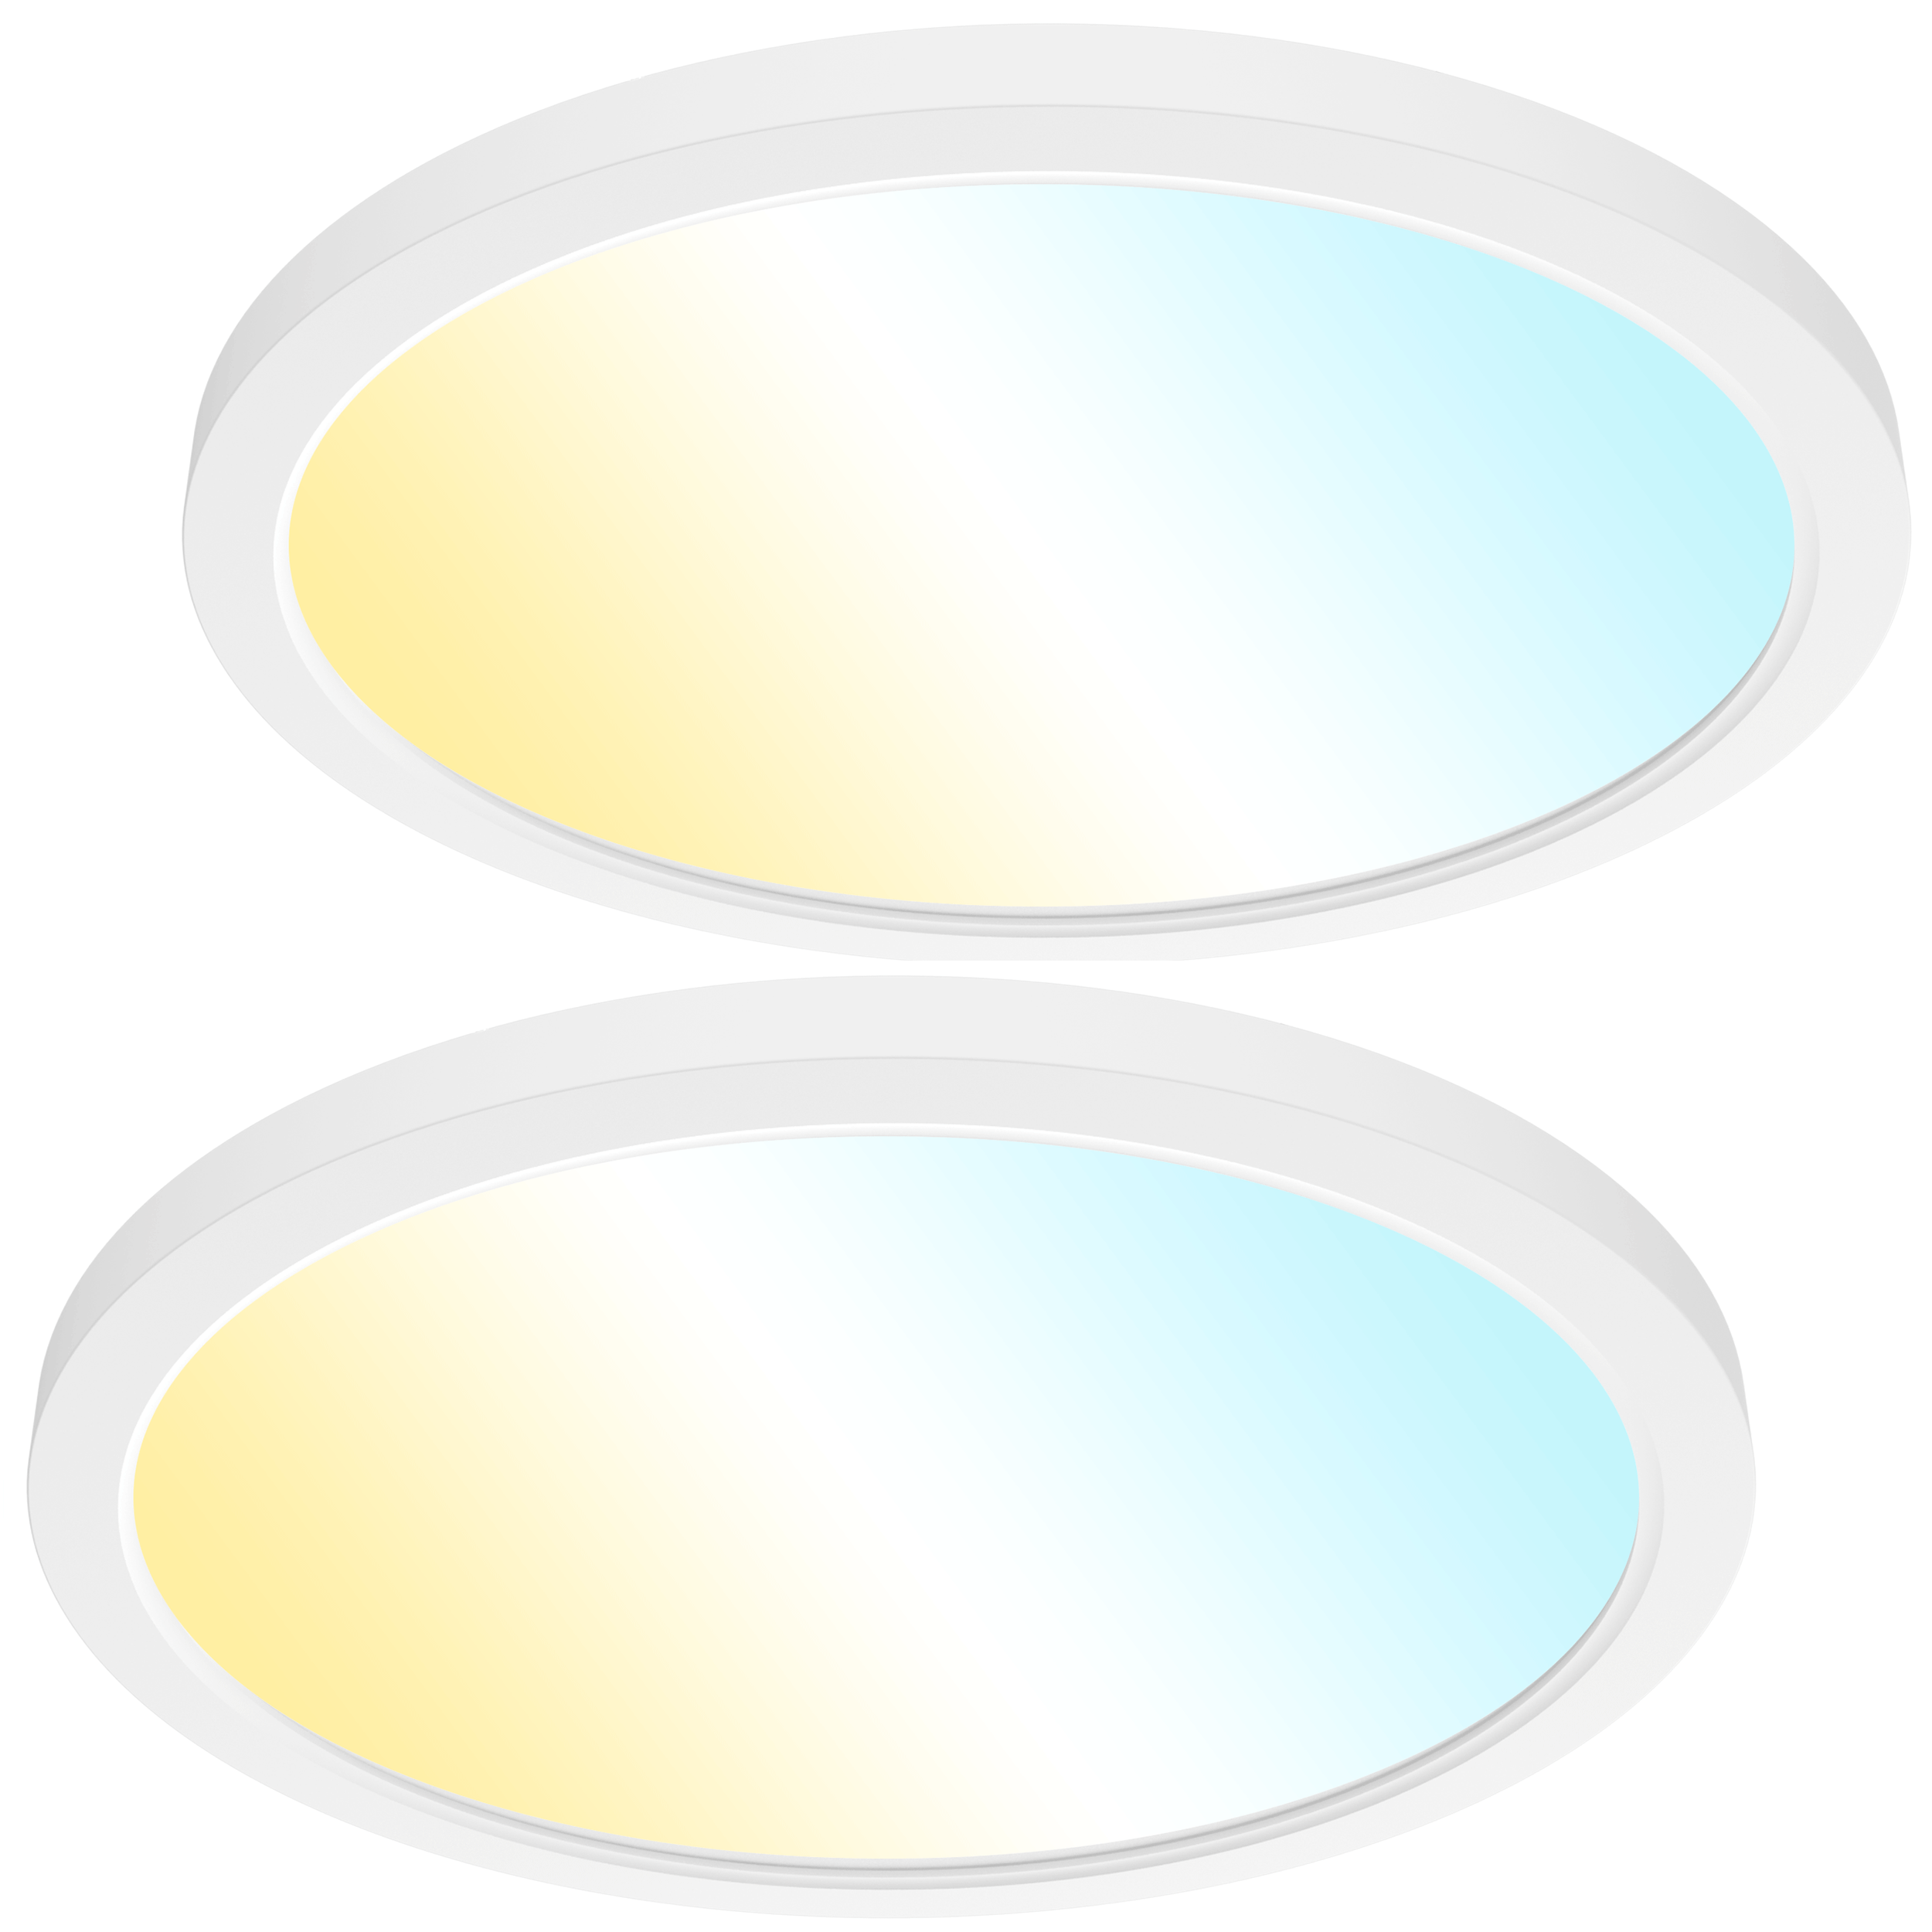 Sunco Lighting 13" White Ceiling Nightlights Front View Selectable CCT Downlight Mode Enabled